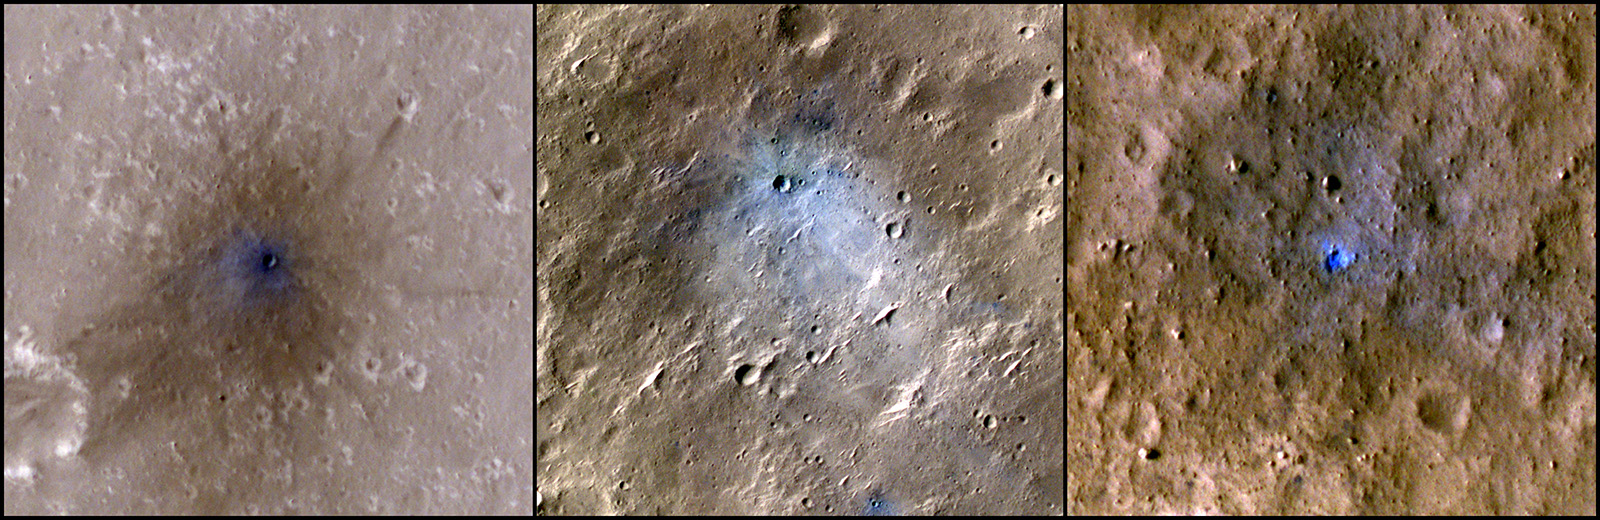 Three overhead images of a brown cratered surfaces with a bright blue-colored crater at the center. Surrounding the crater in each image is a splotch of different colored material sprayed out in all directions.